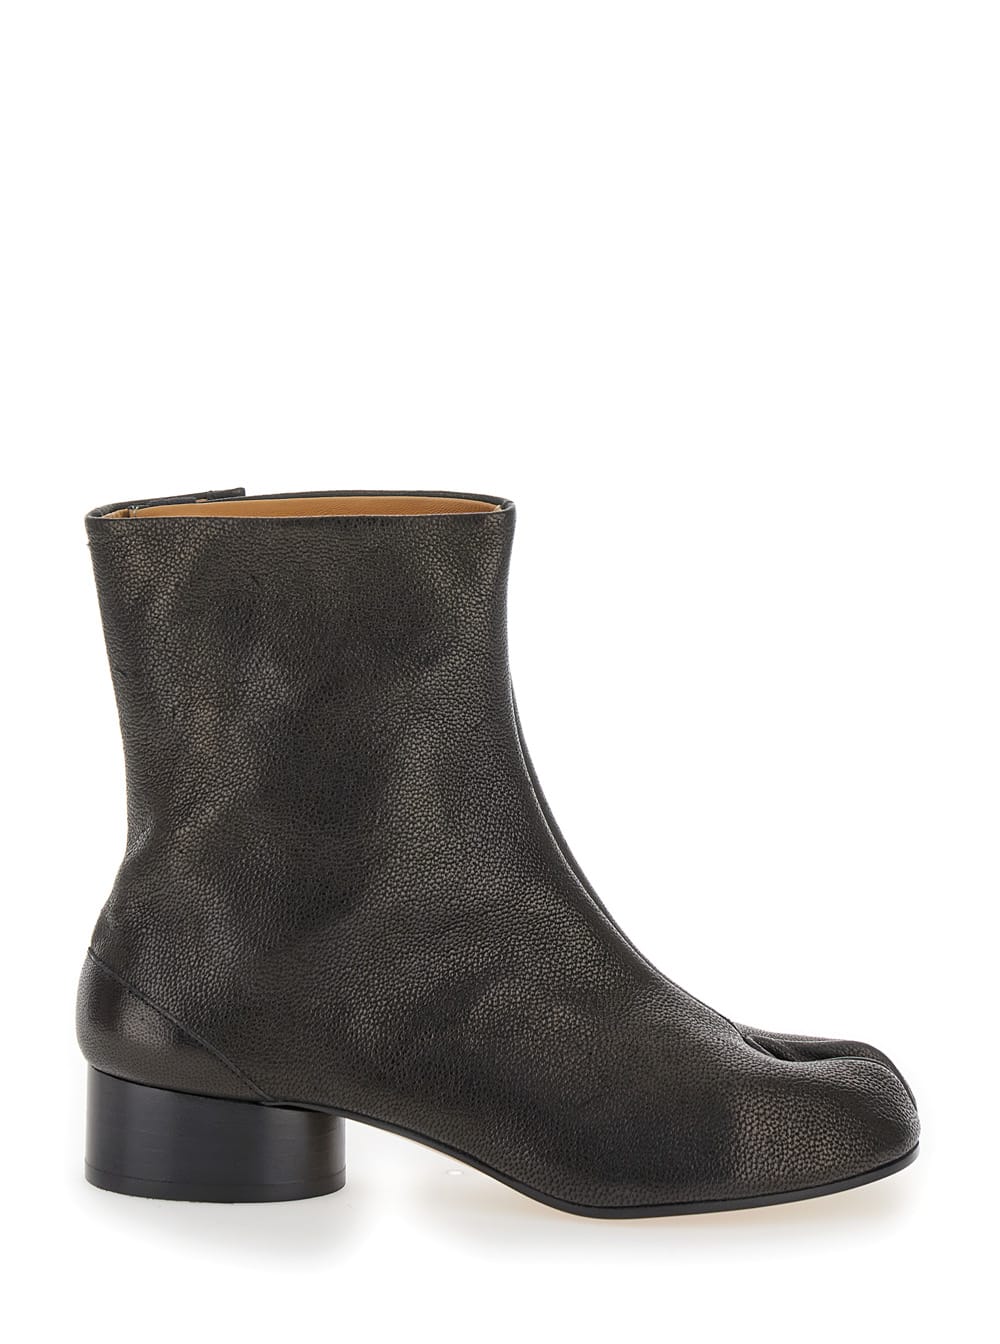 Maison Margiela Tabi Black Ankle Boots In Leather Woman